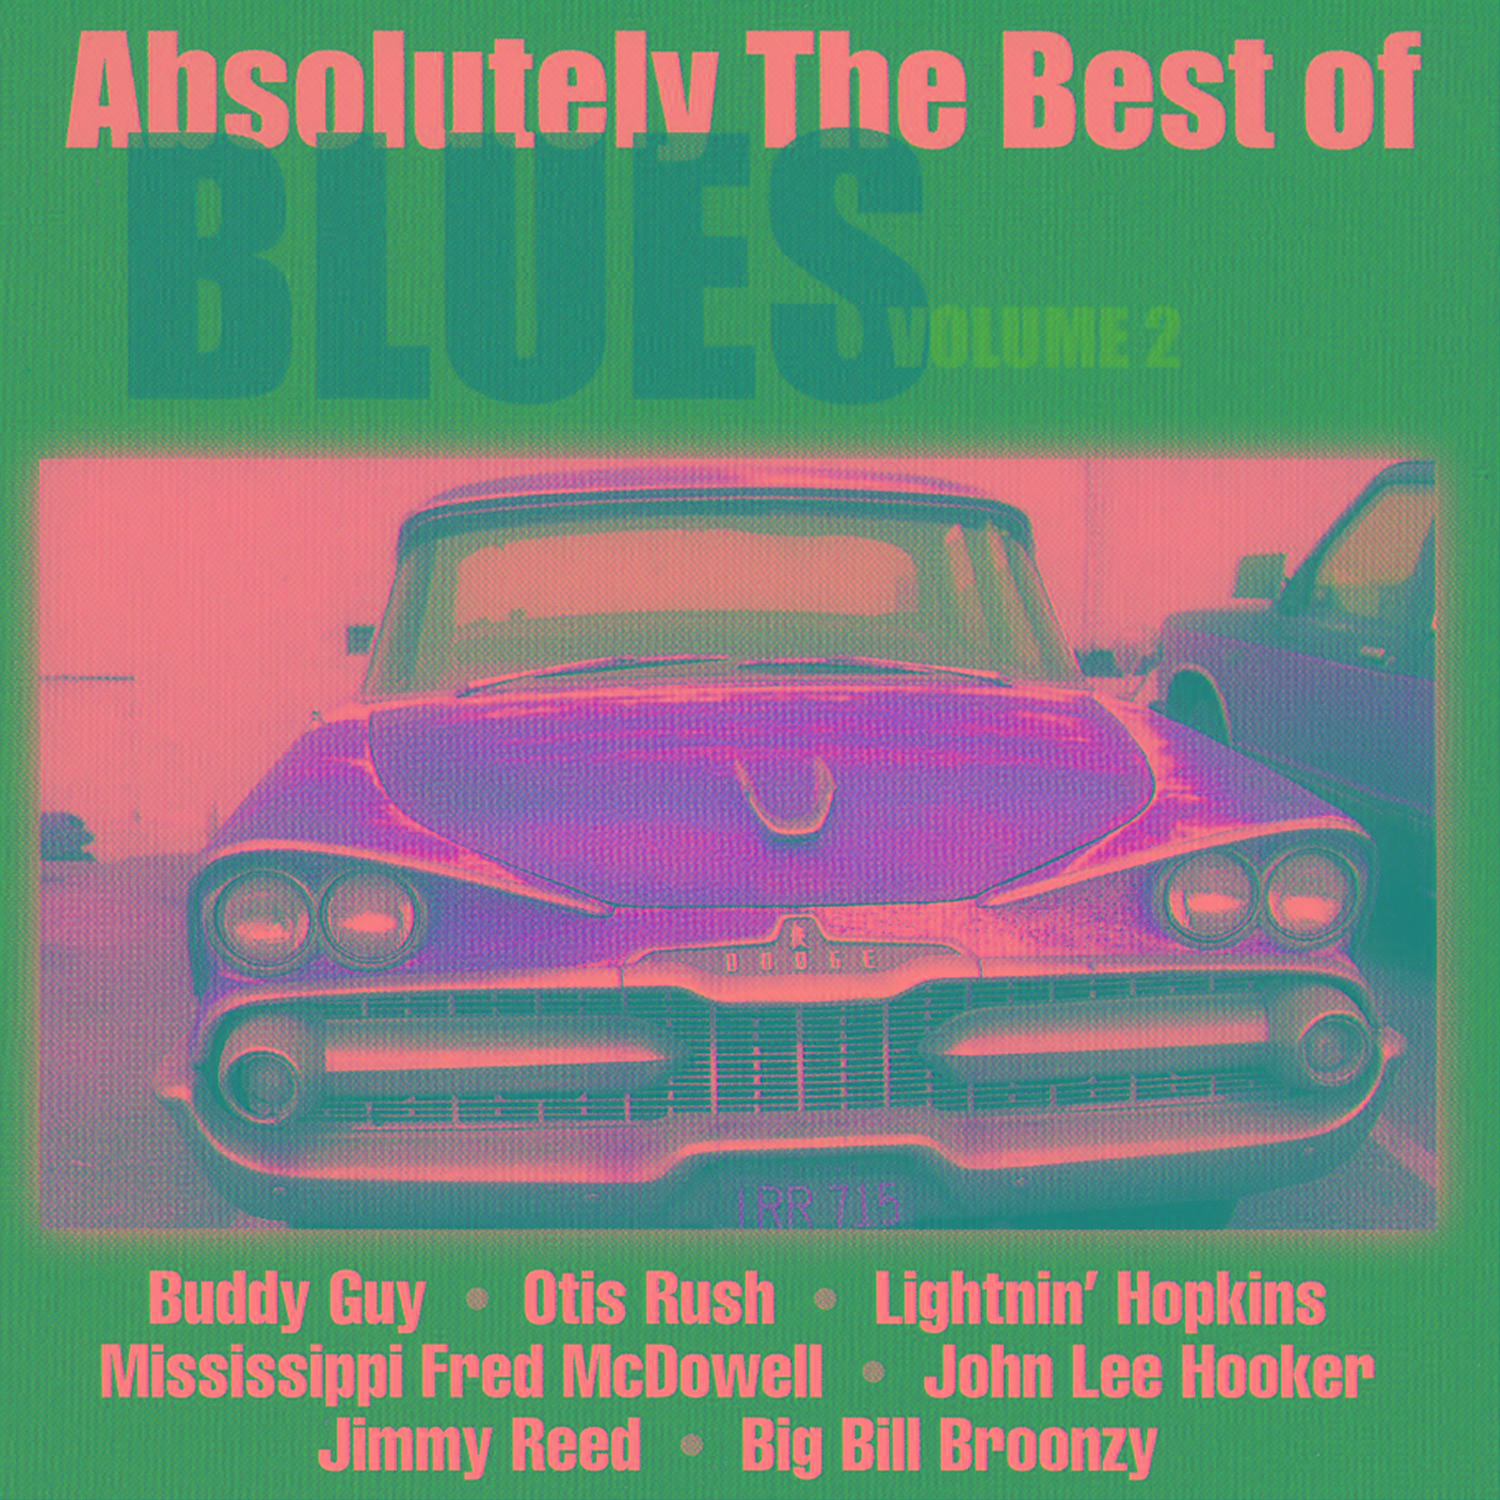 Absolutely the Best of Blues